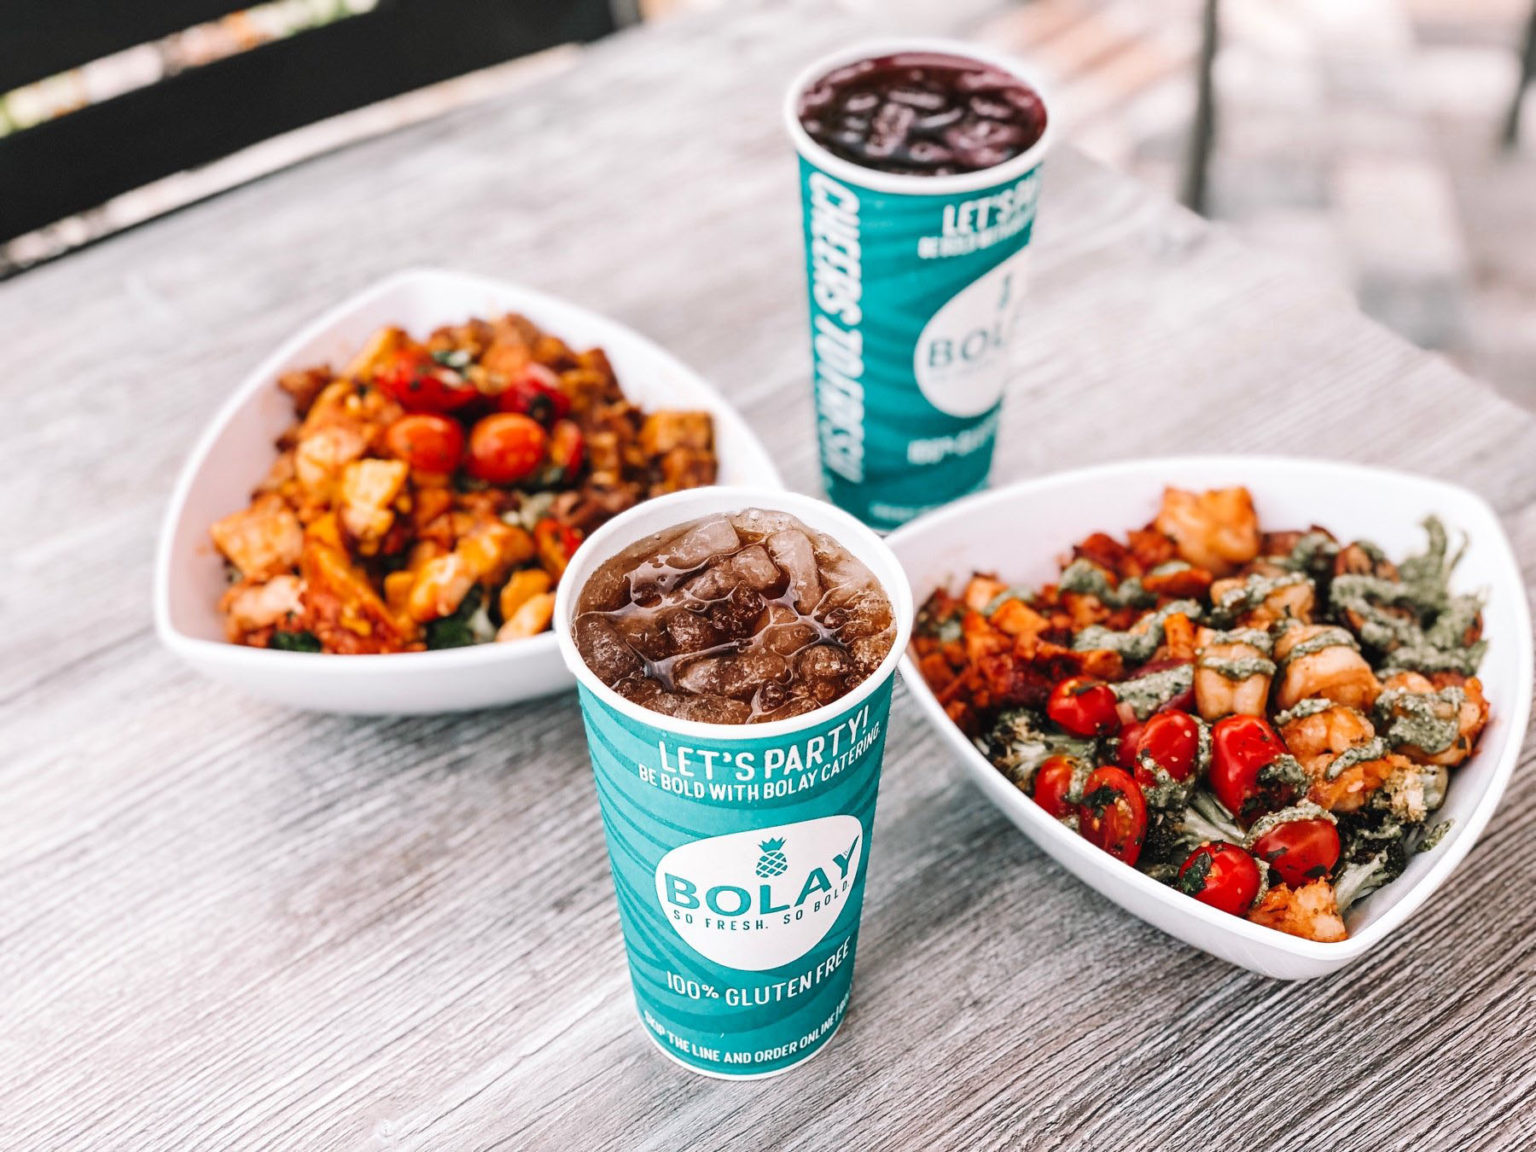 Bolay Opening Fast-Casual Healthy Restaurant in Coral Springs • Coral